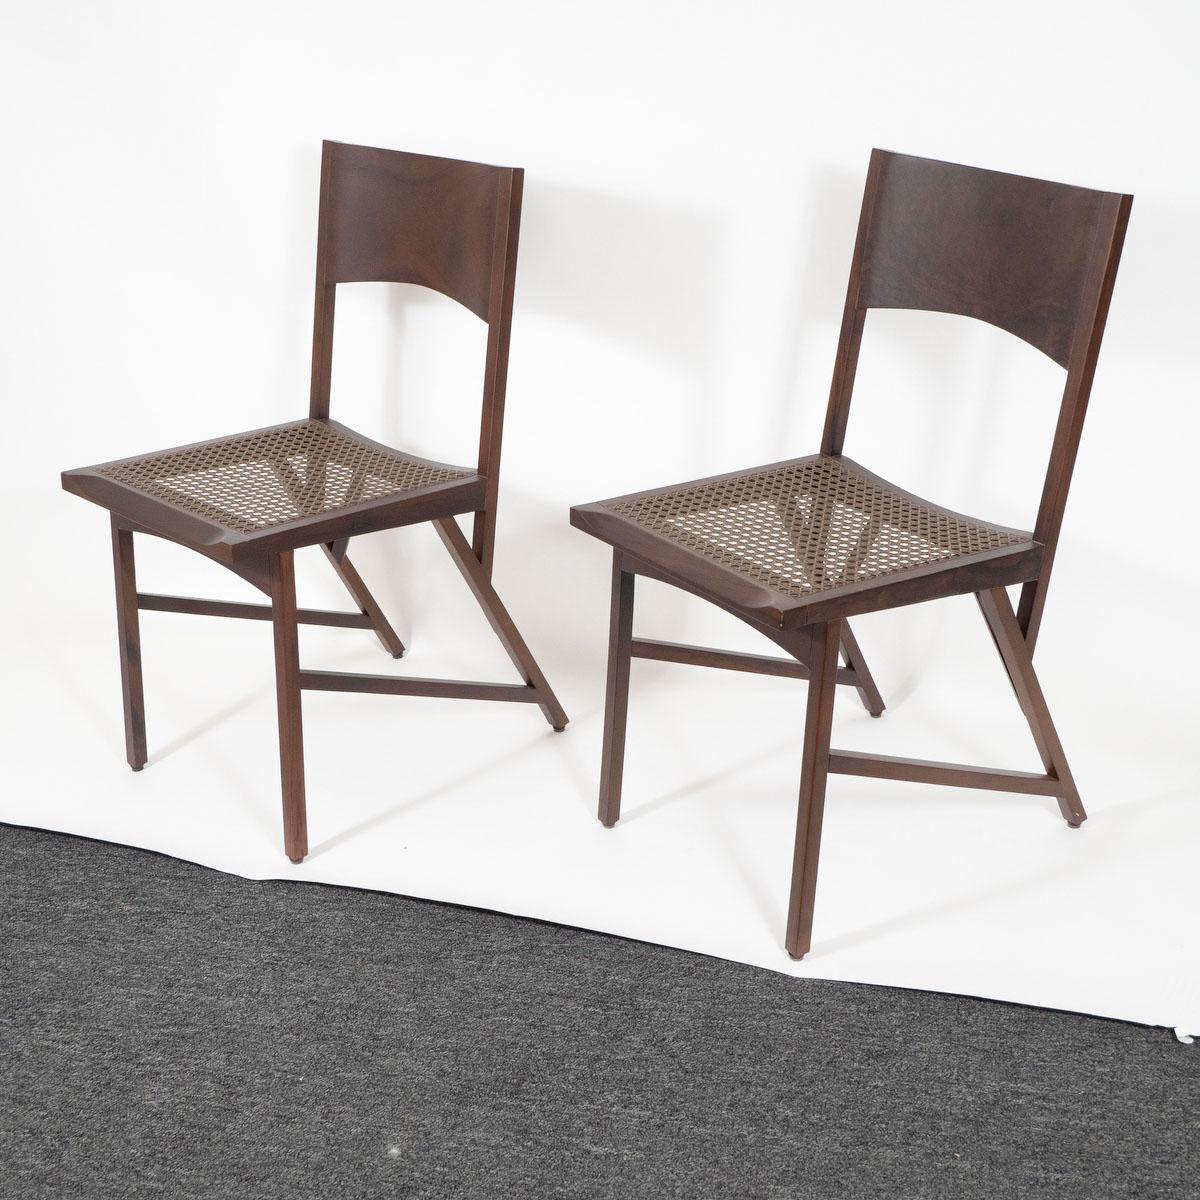 Brazilian Pair of Limited Edition Wood Chairs by Paolo Alves For Sale